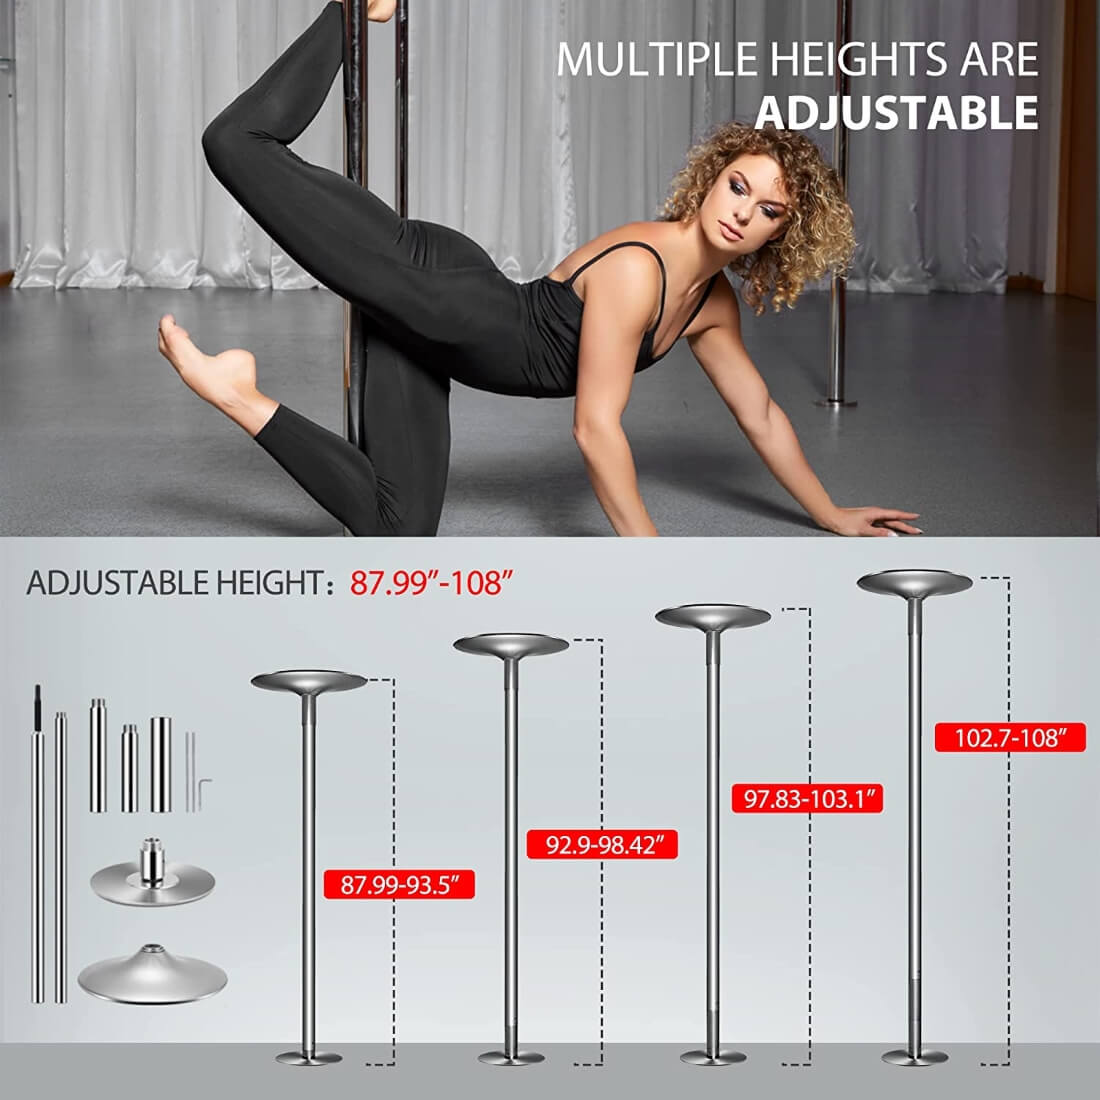 VIVOHOME Perfect Fitness Bar Portable Spinning Dance Stripping Pole for Home Fitness